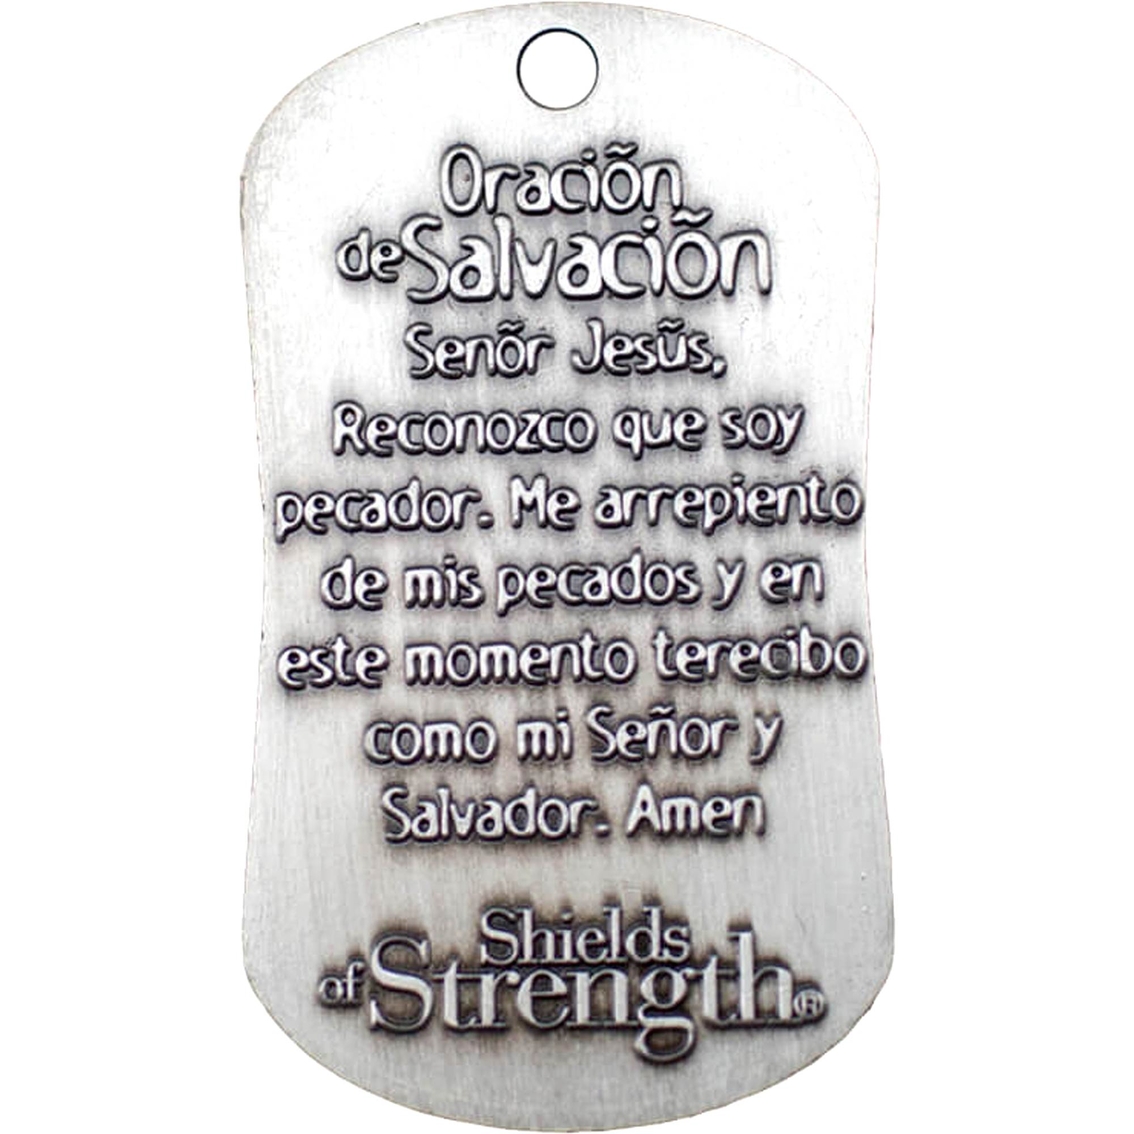 Shields of Strength Phil 4:13 Spanish Antique Finish Dog Tag Necklace - Image 2 of 2